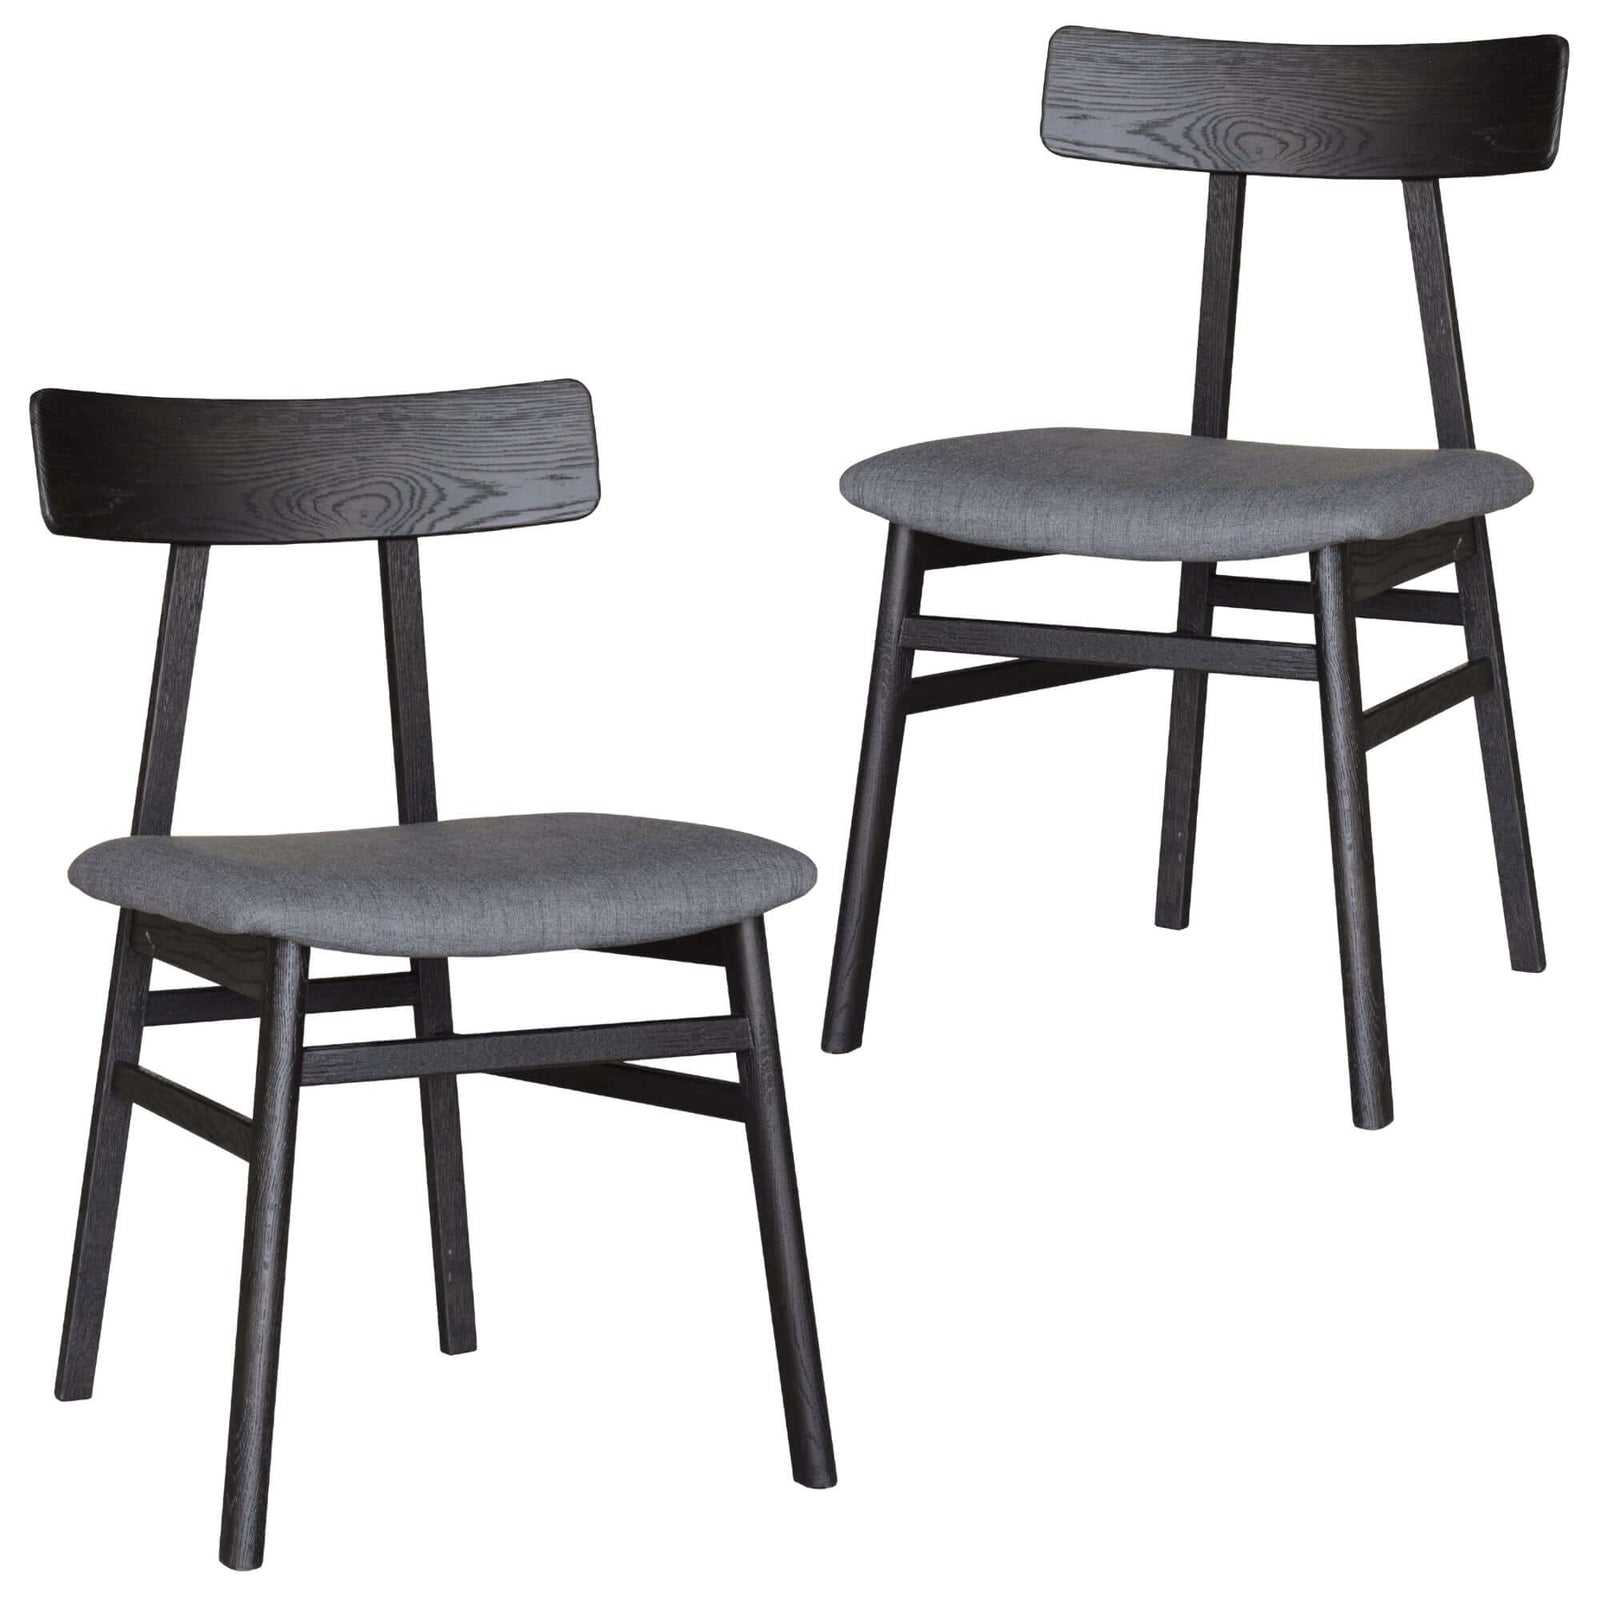 Claire Dining Chair Set of 2 Solid Oak Wood Fabric Seat Furniture - Black-Upinteriors